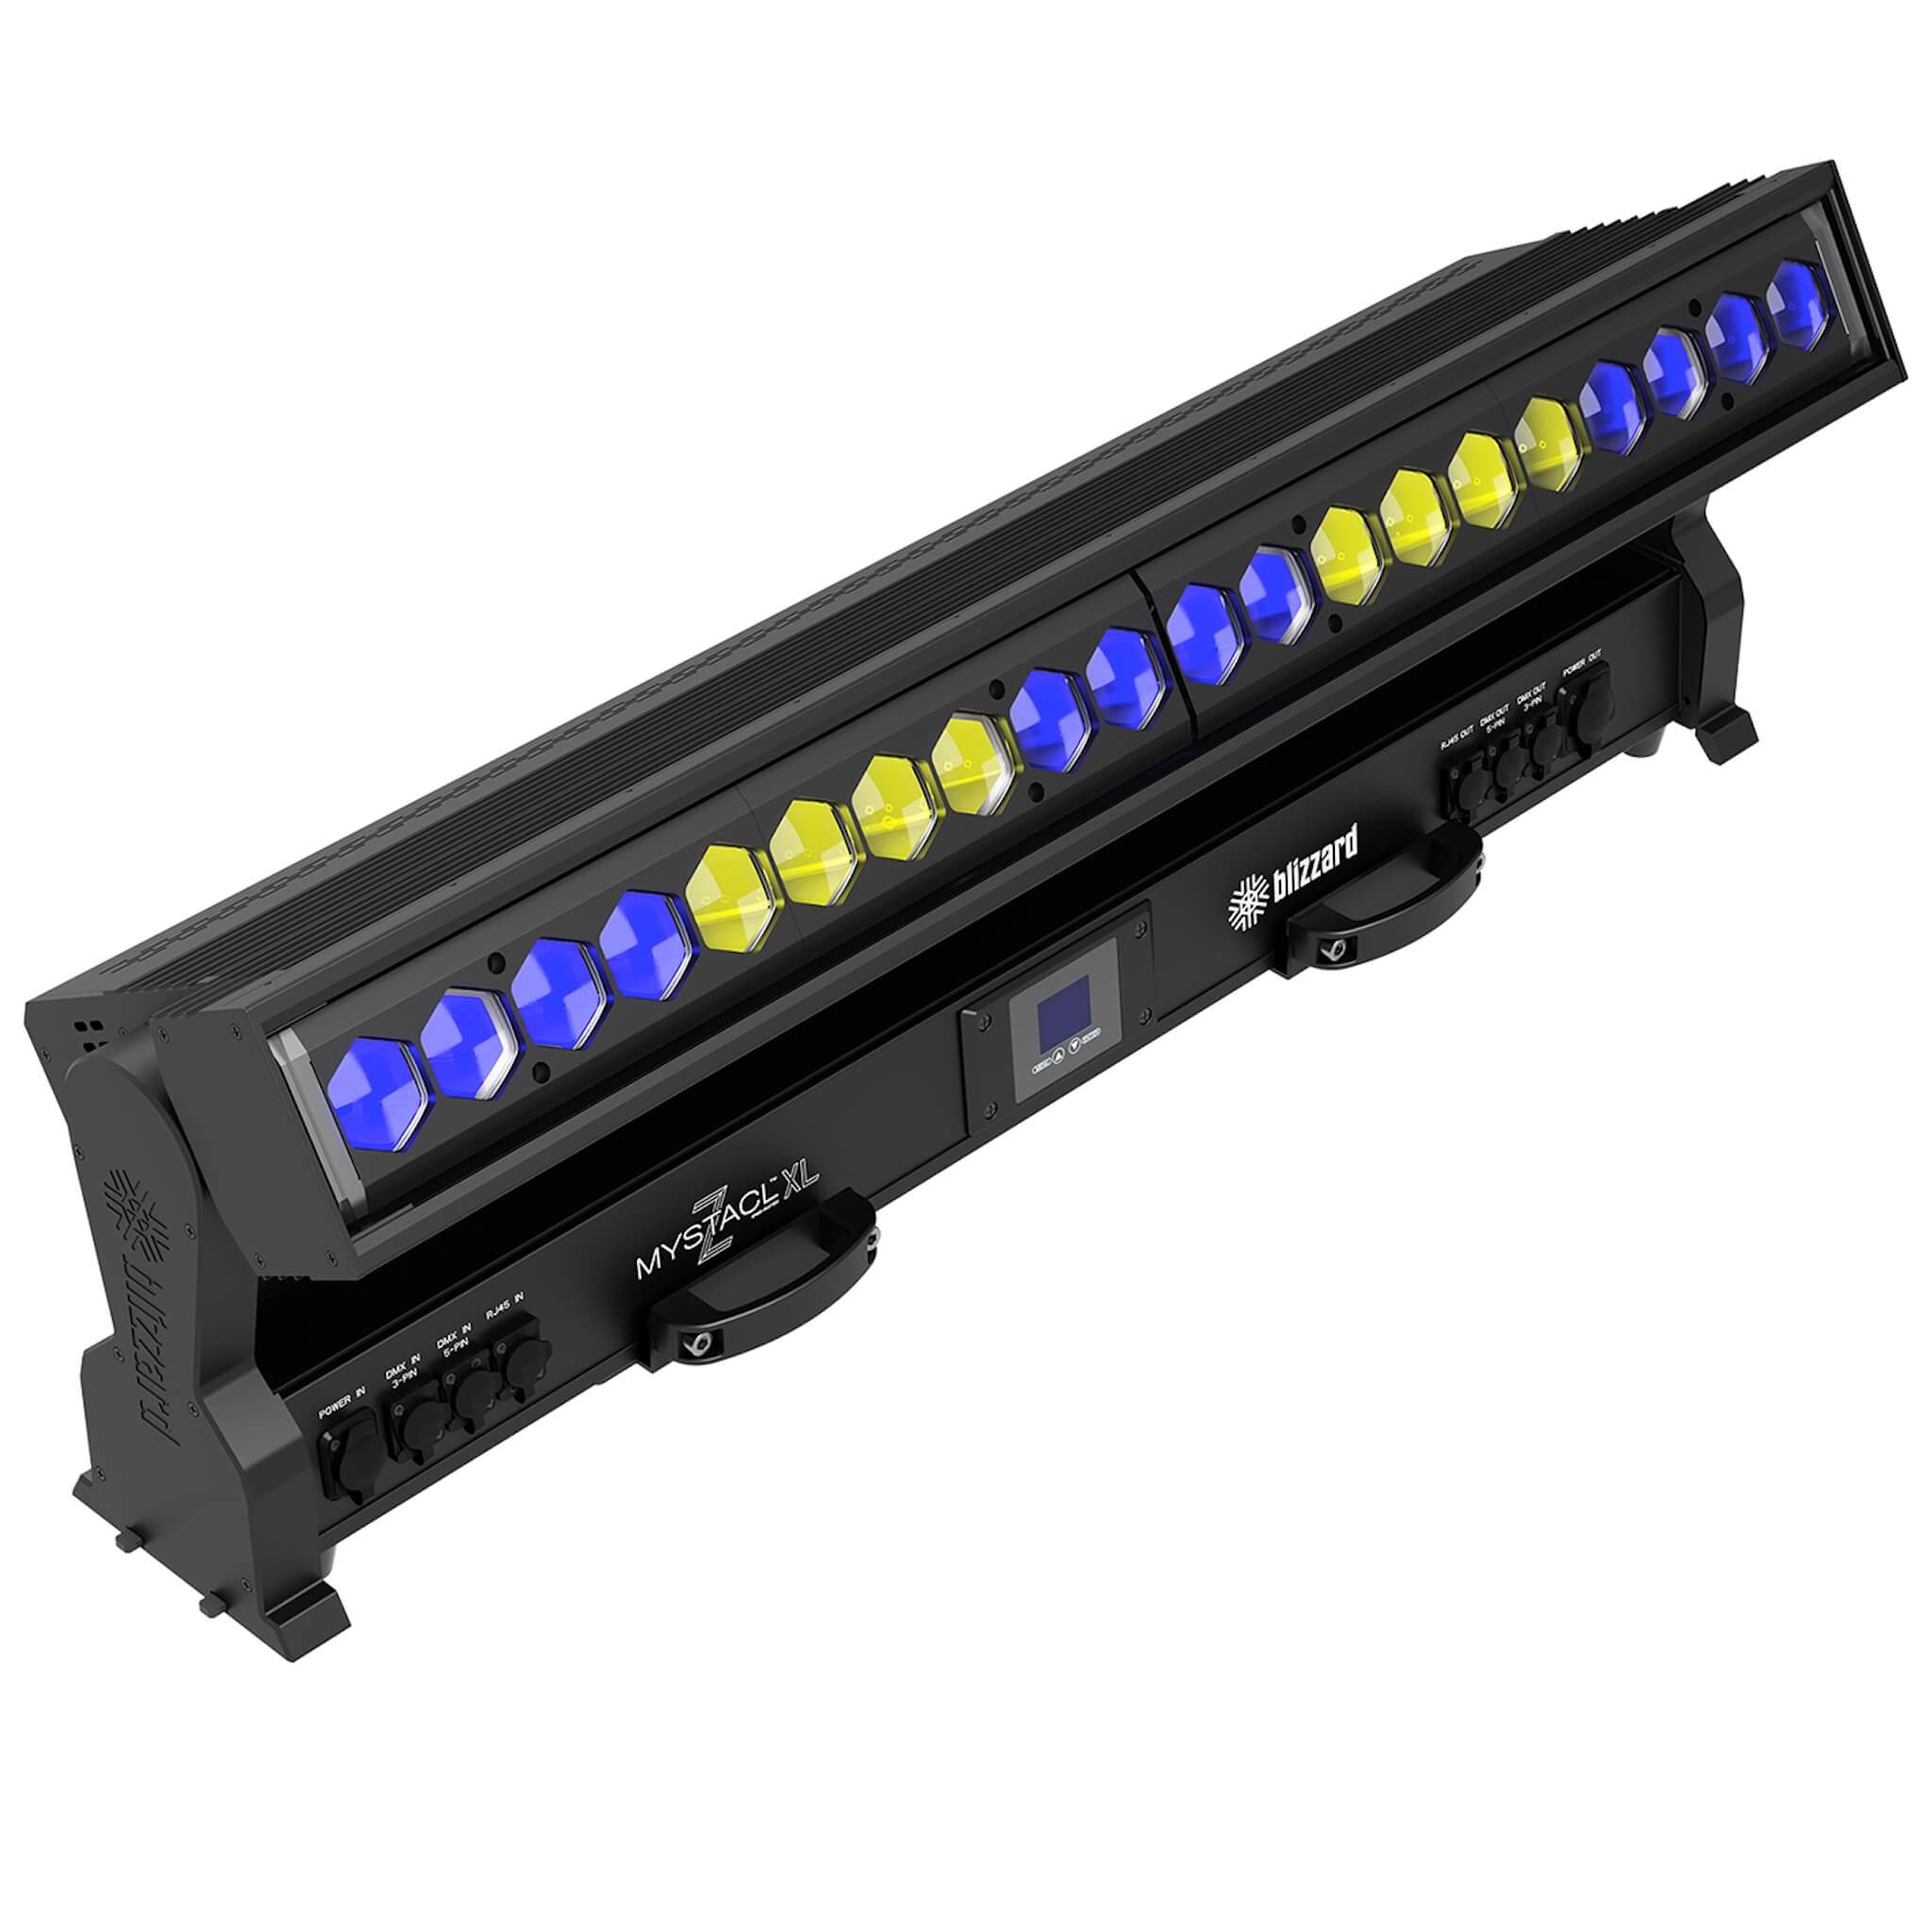 Blizzard Lighting MystACL Z IP XL - LED Moving Head Zoomable Batten, illuminated blue and yellow